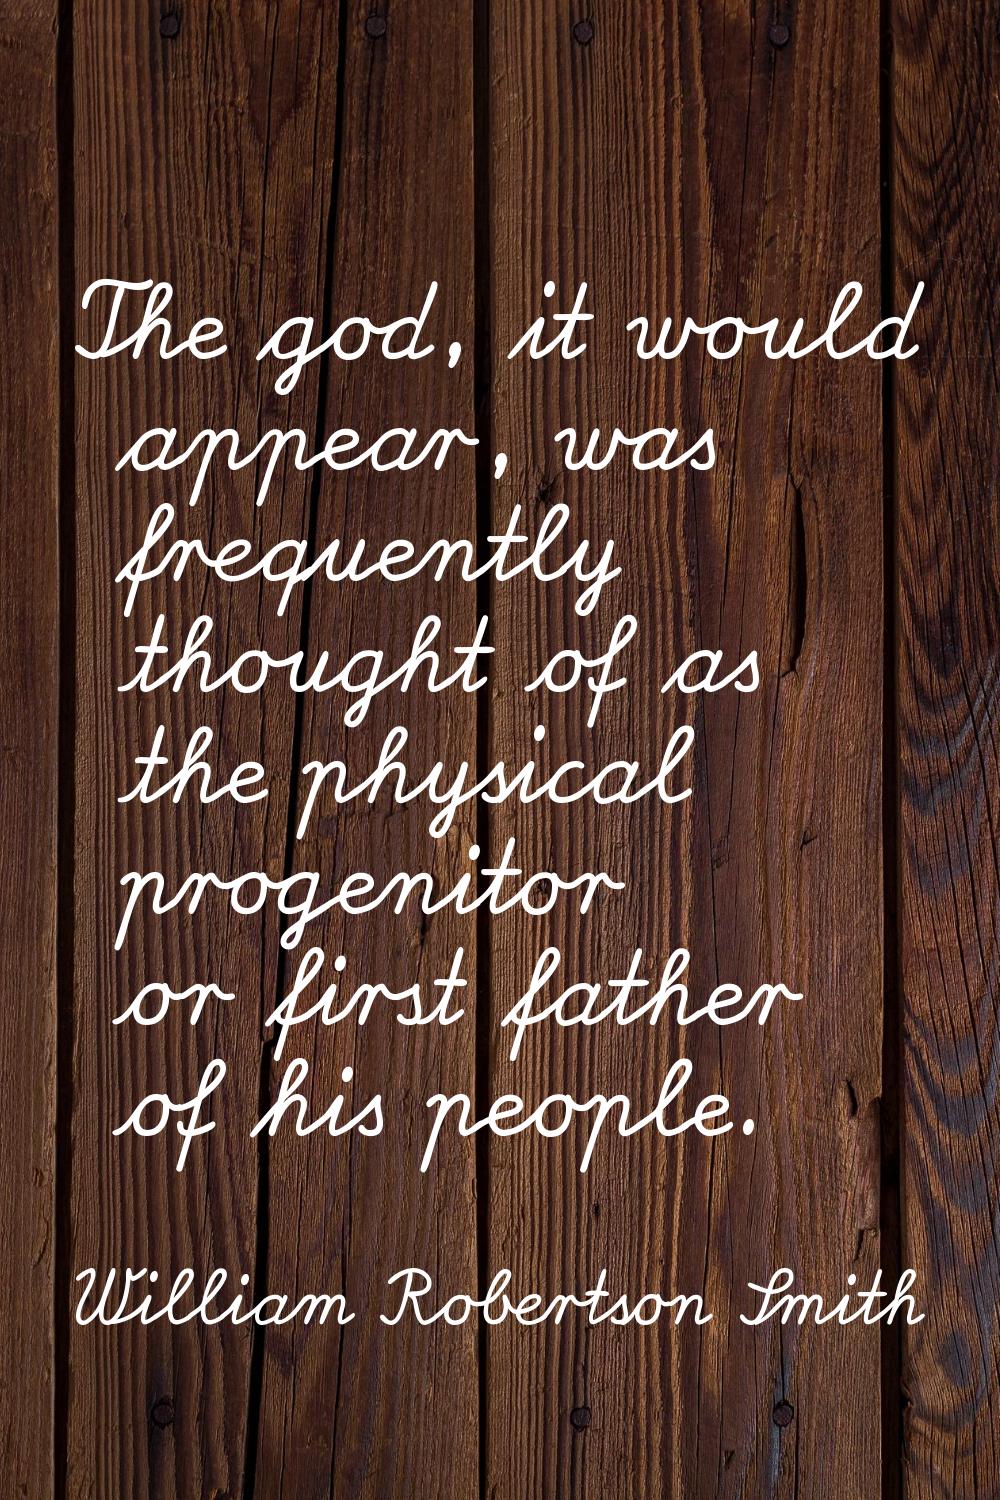 The god, it would appear, was frequently thought of as the physical progenitor or first father of h